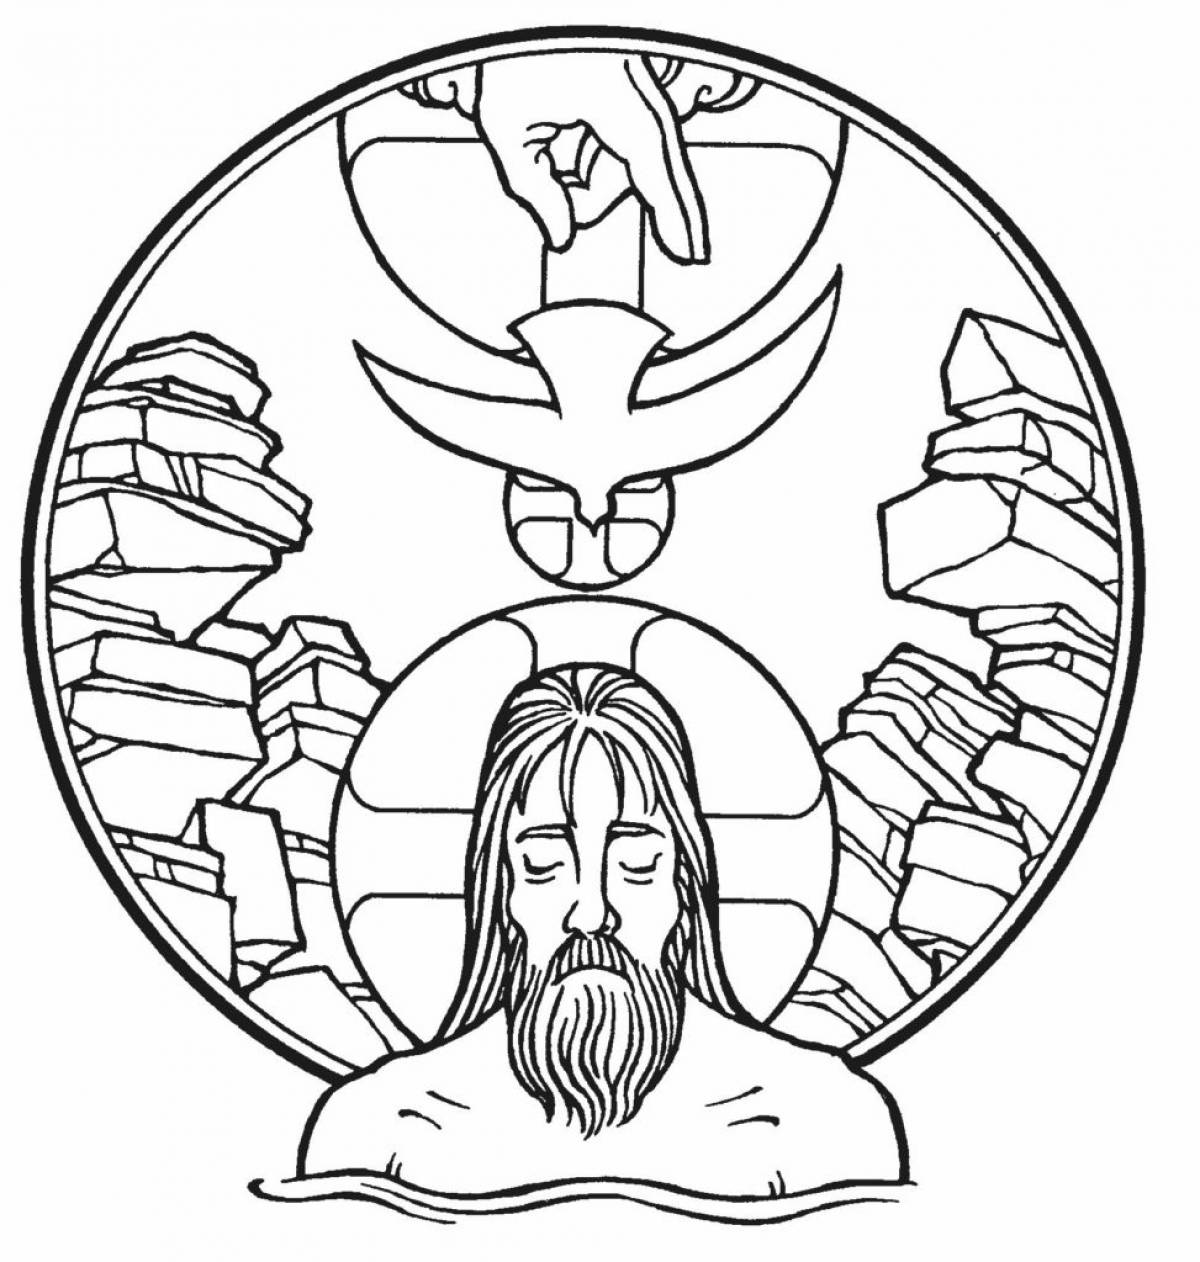 Colorfully bright jesus baptism coloring book